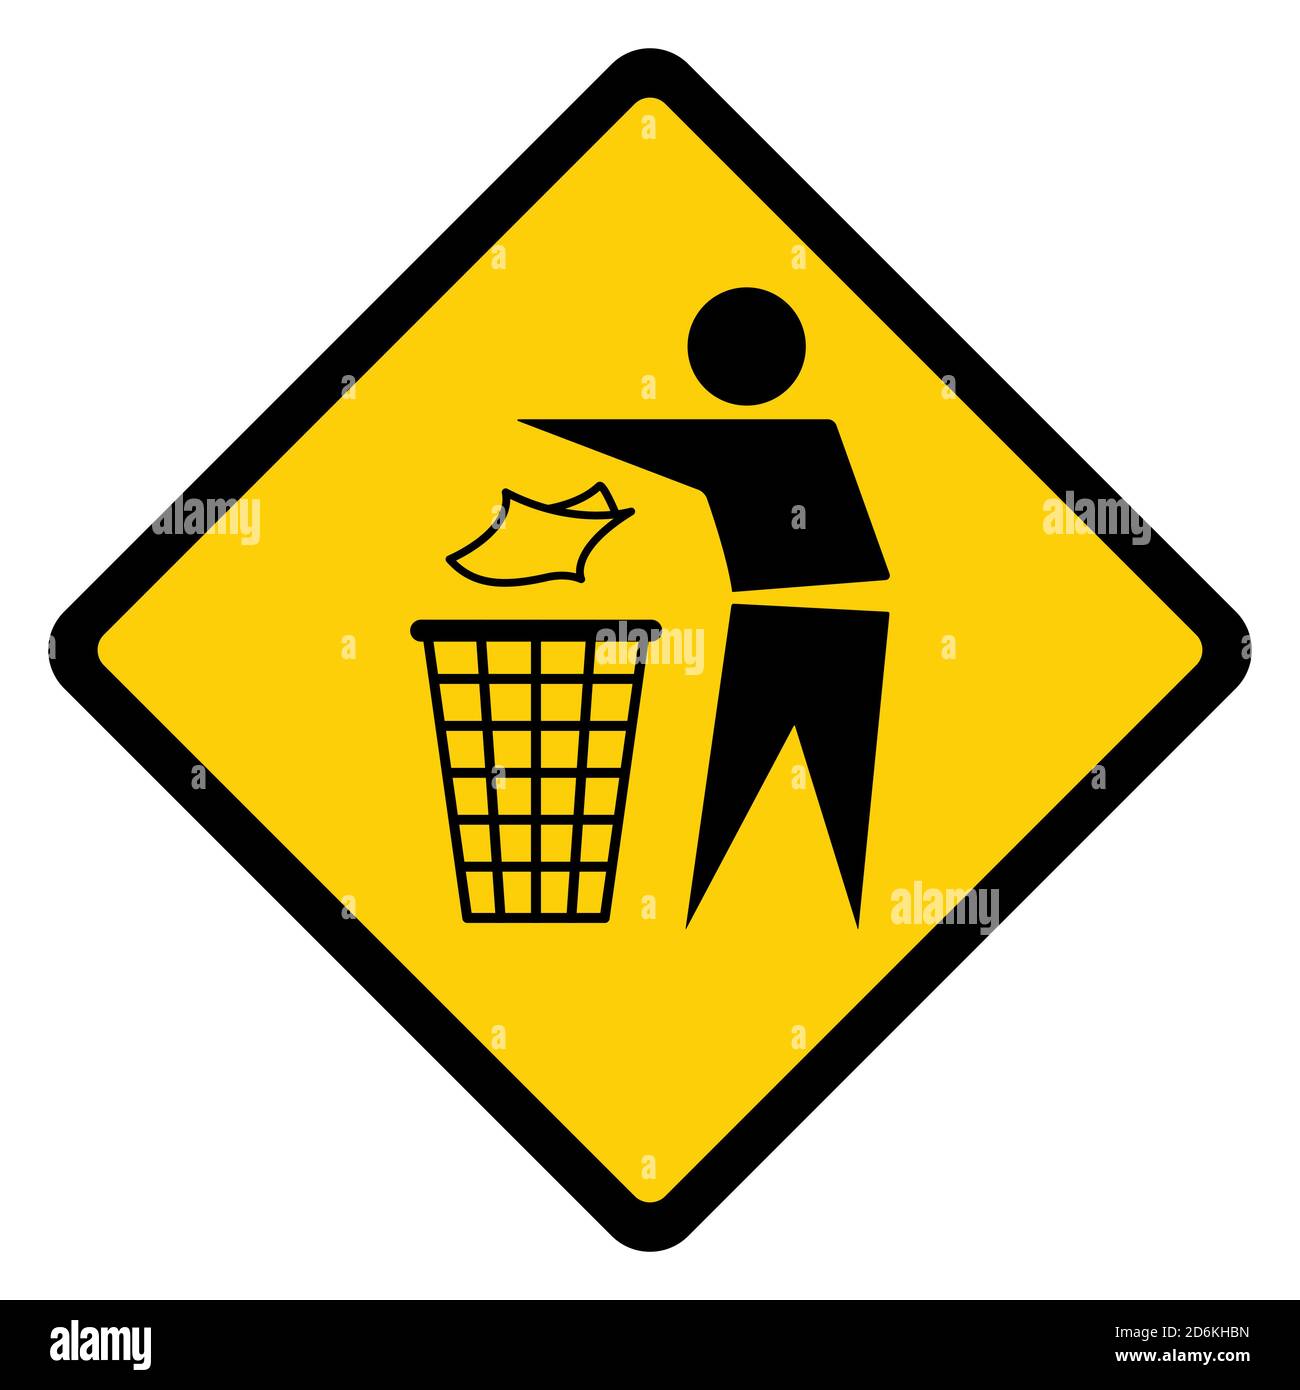 Do not litter flat icon in yellow rhombus isolated on white background. Keep it clean vector illustration. Tidy symbol . Stock Vector